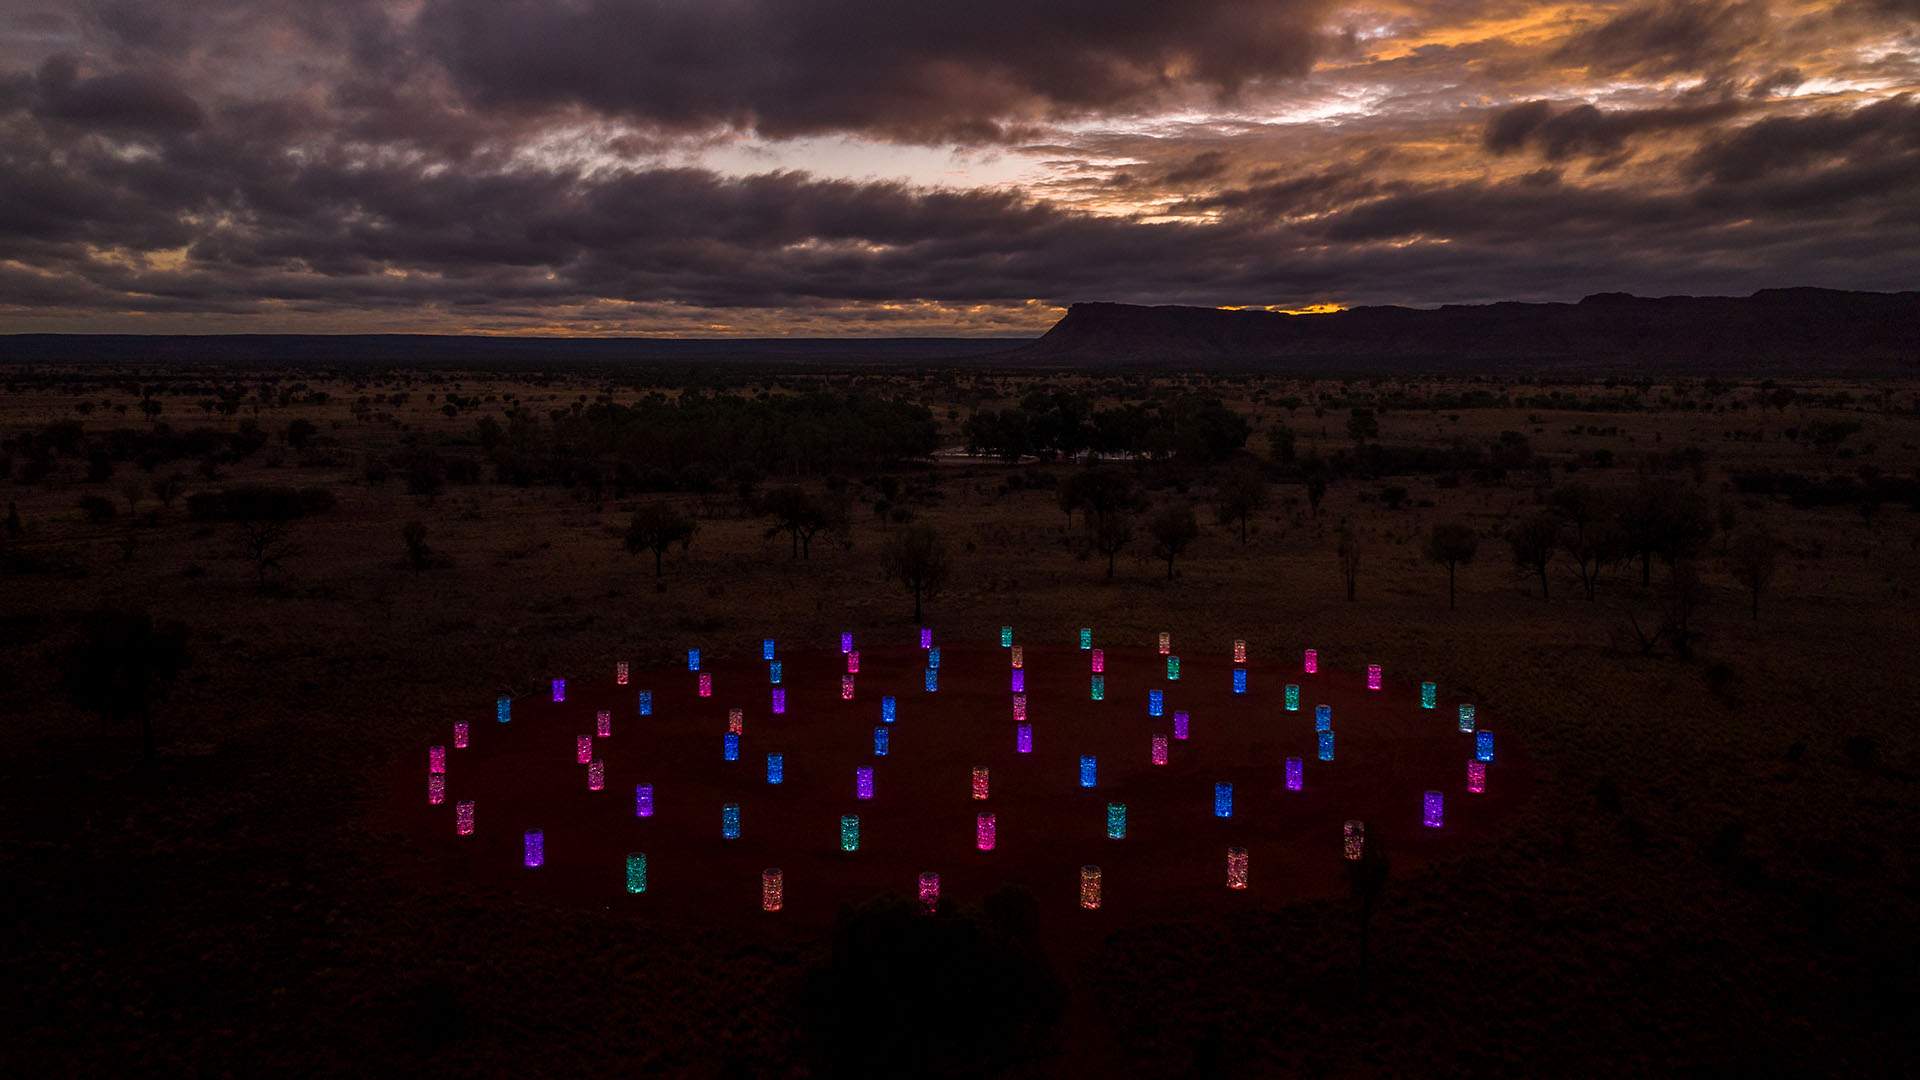 Bruce Munro's New 'Light-Towers' Installation Is Now Dazzling the Northern Territory's Kings Canyon